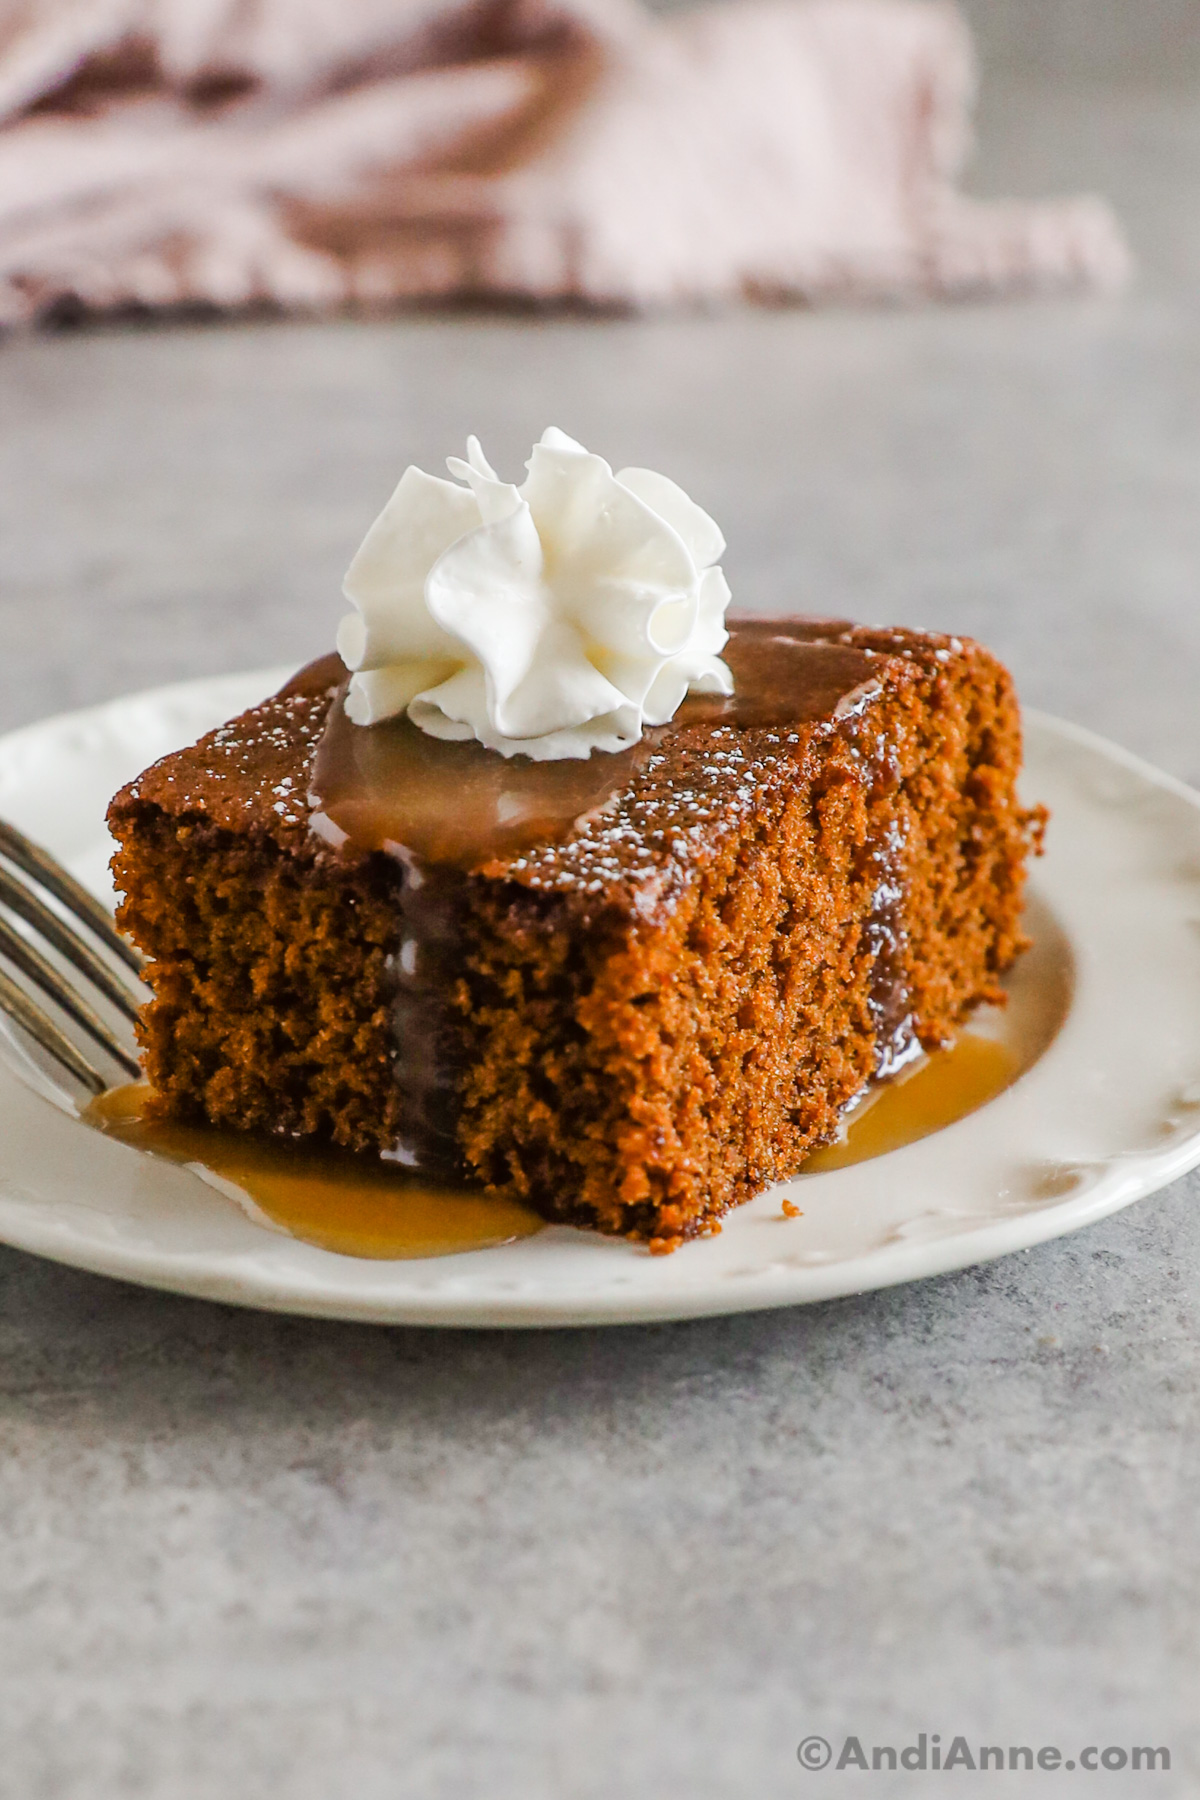 A slice of gingerbread cake drizzled with caramel sauce and topped with whipped cream.